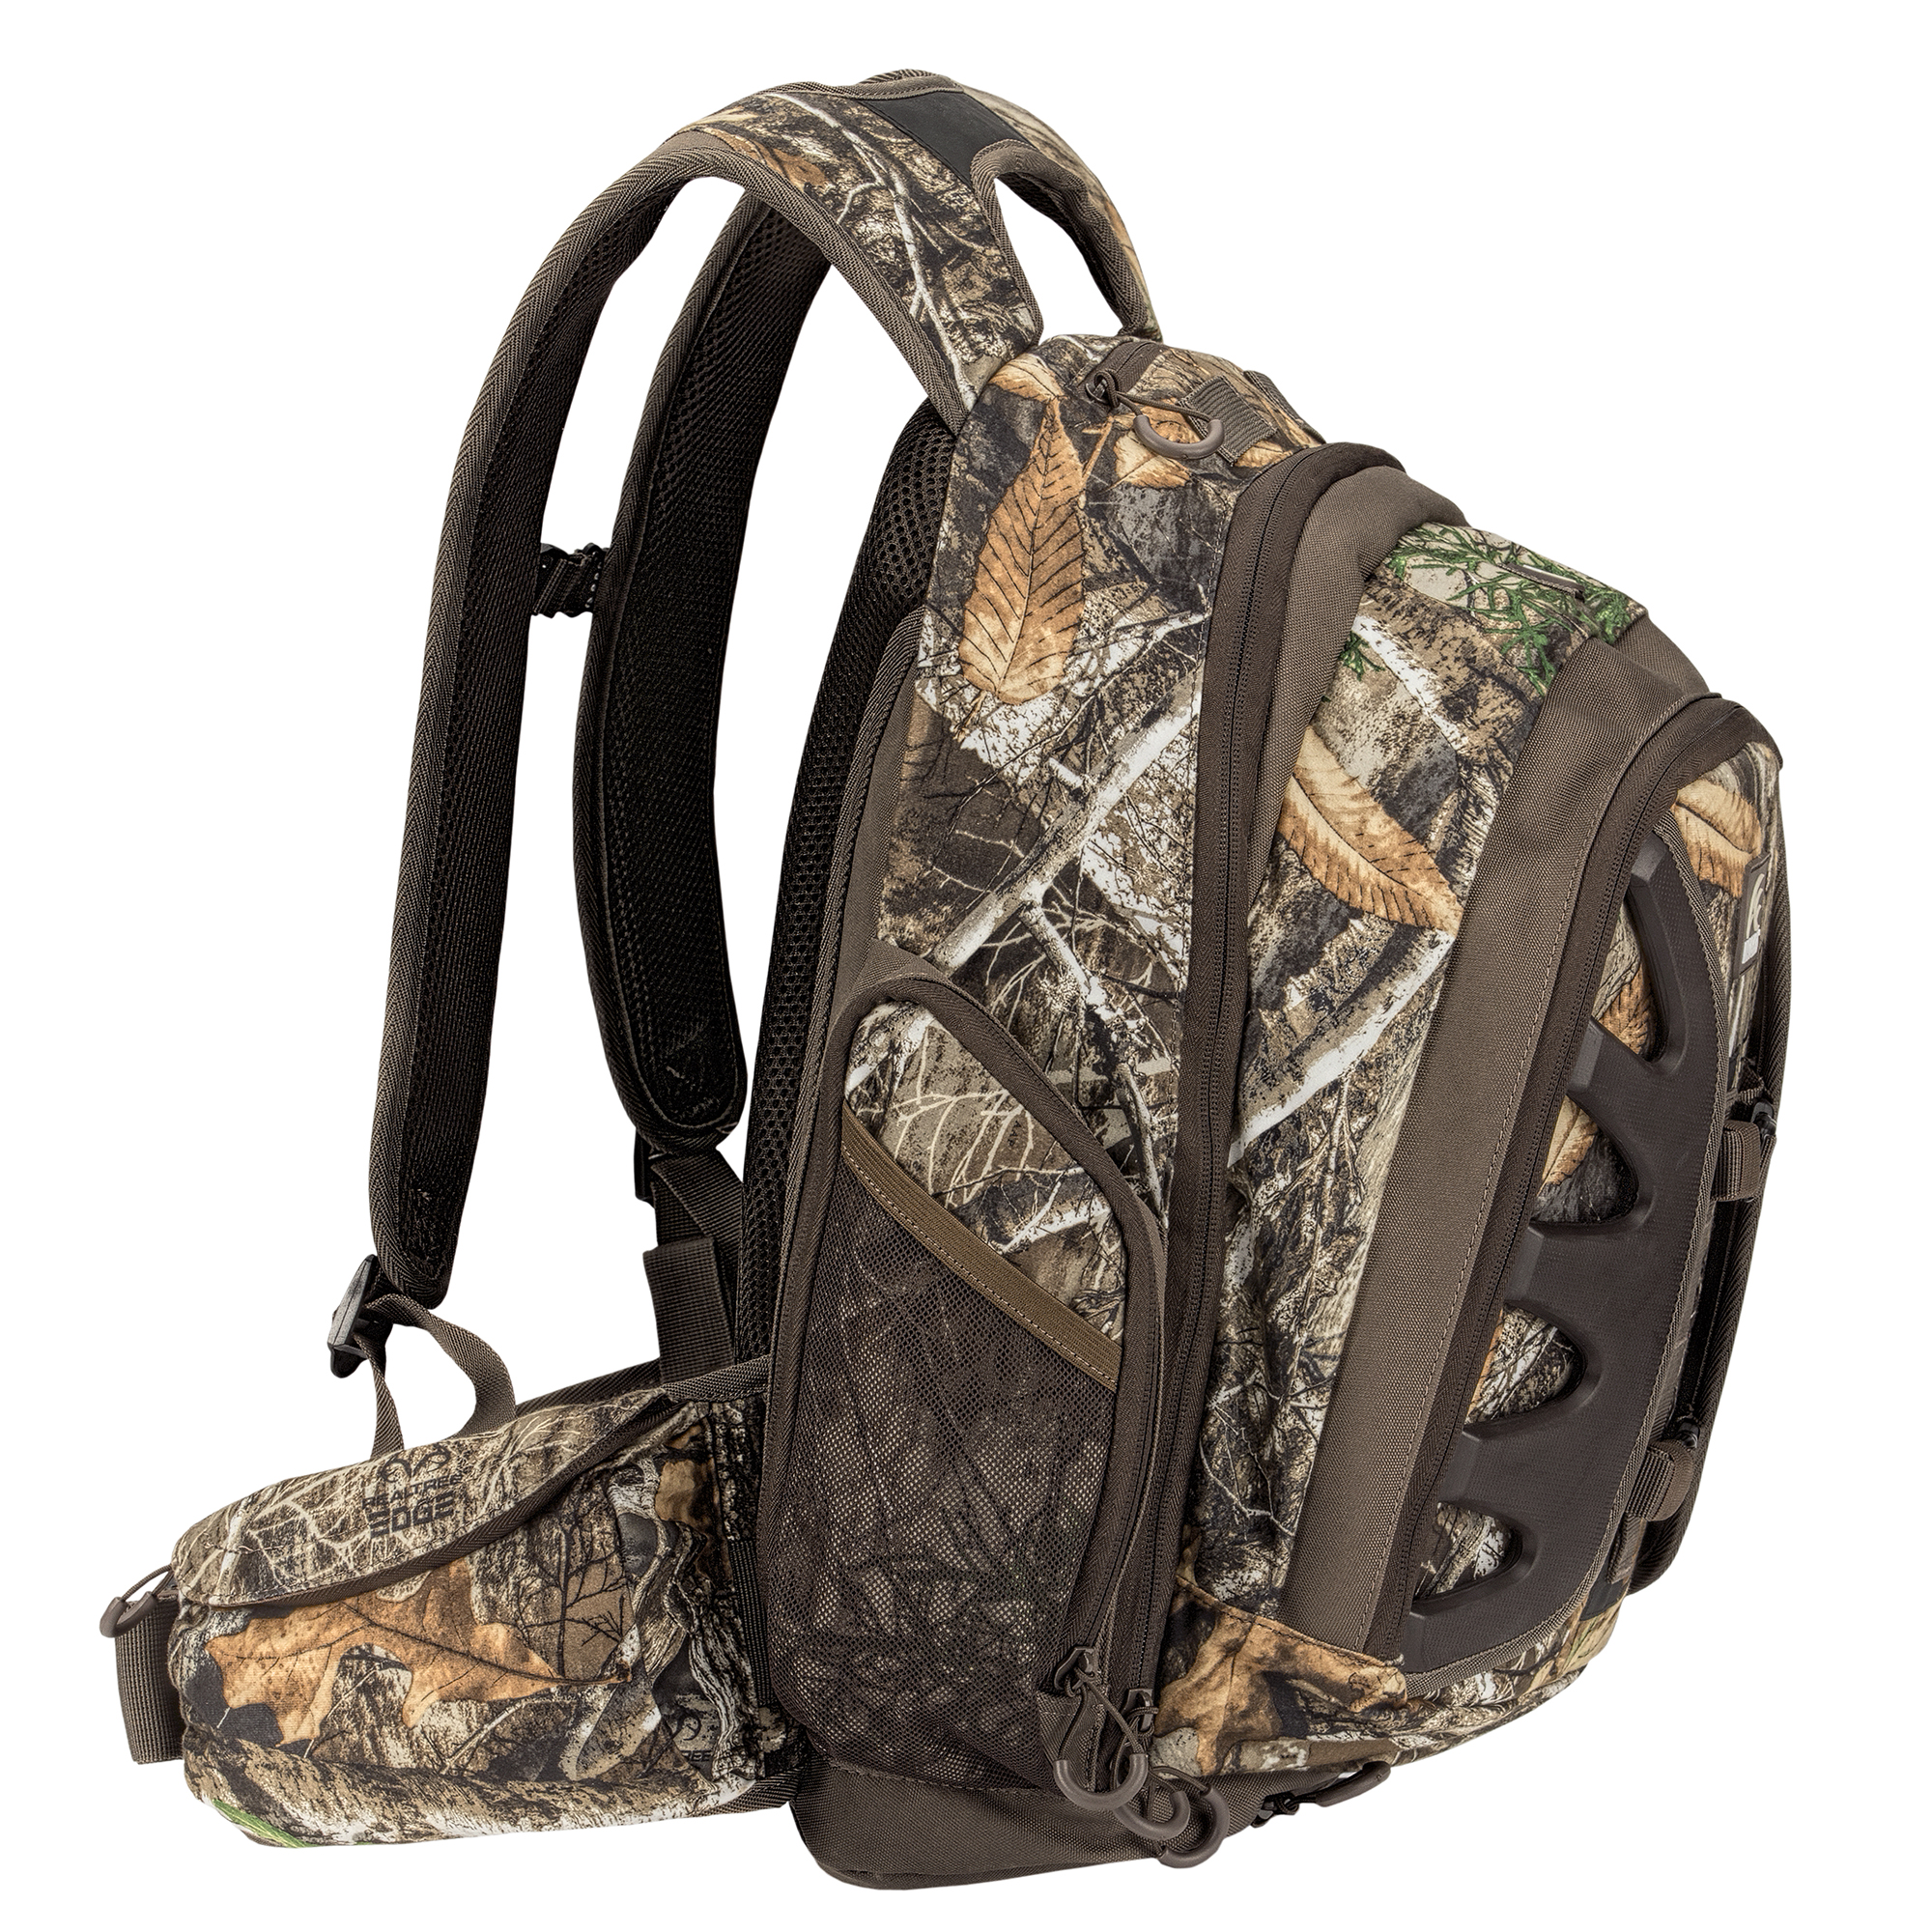 Insights 9301 The Element Outdoor Hiking Hunting Backpack, Realtree Edge Camo - image 4 of 9